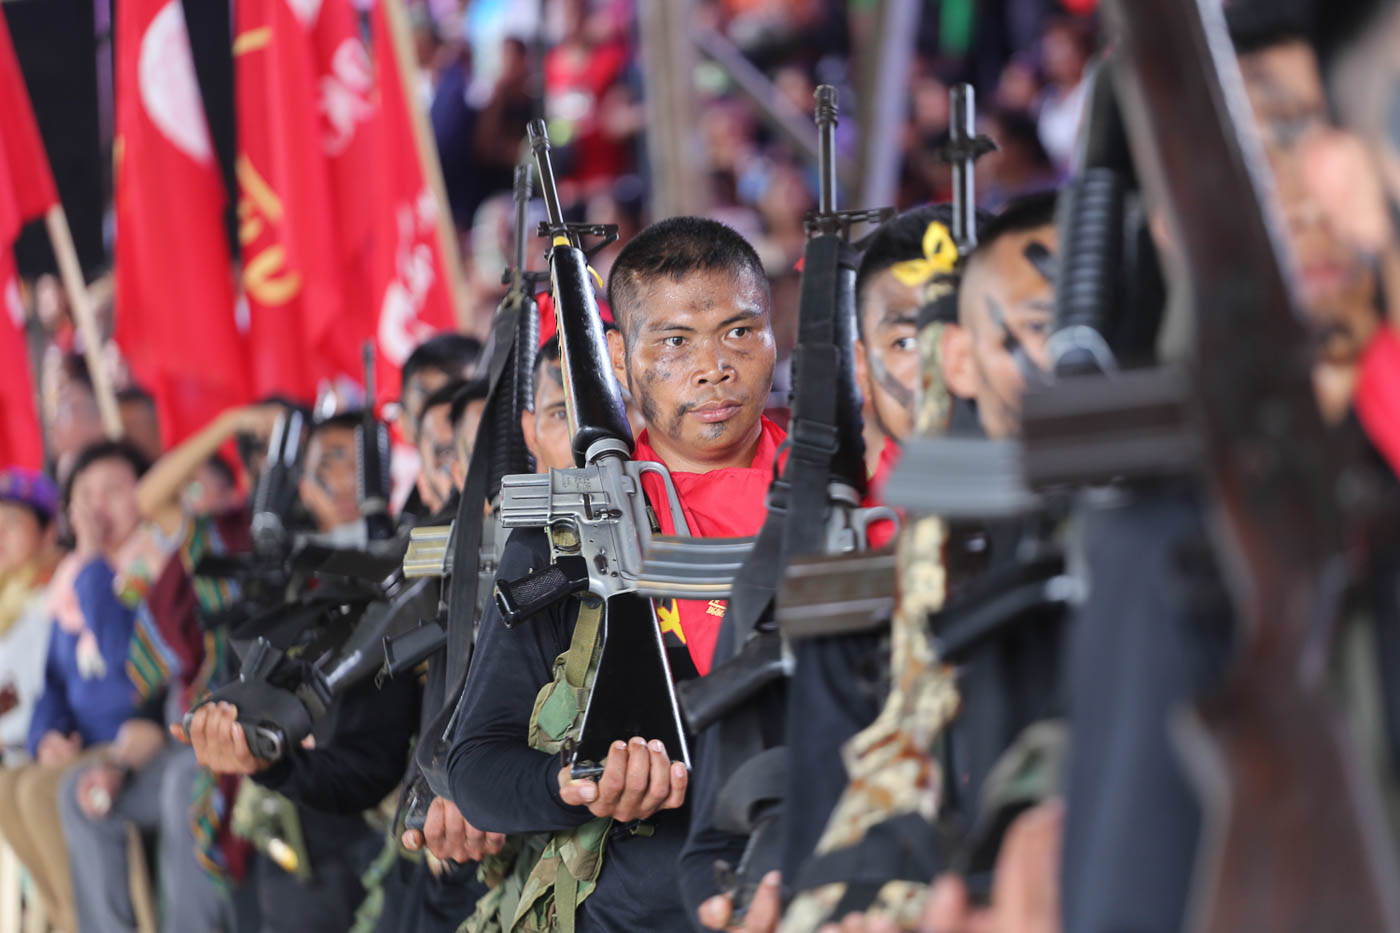 48 YEARS AND COUNTING. New People's Army fighters in Paquibato District, Davao City, on December 26, 2016. Photo by Manman Dejeto/Rappler  